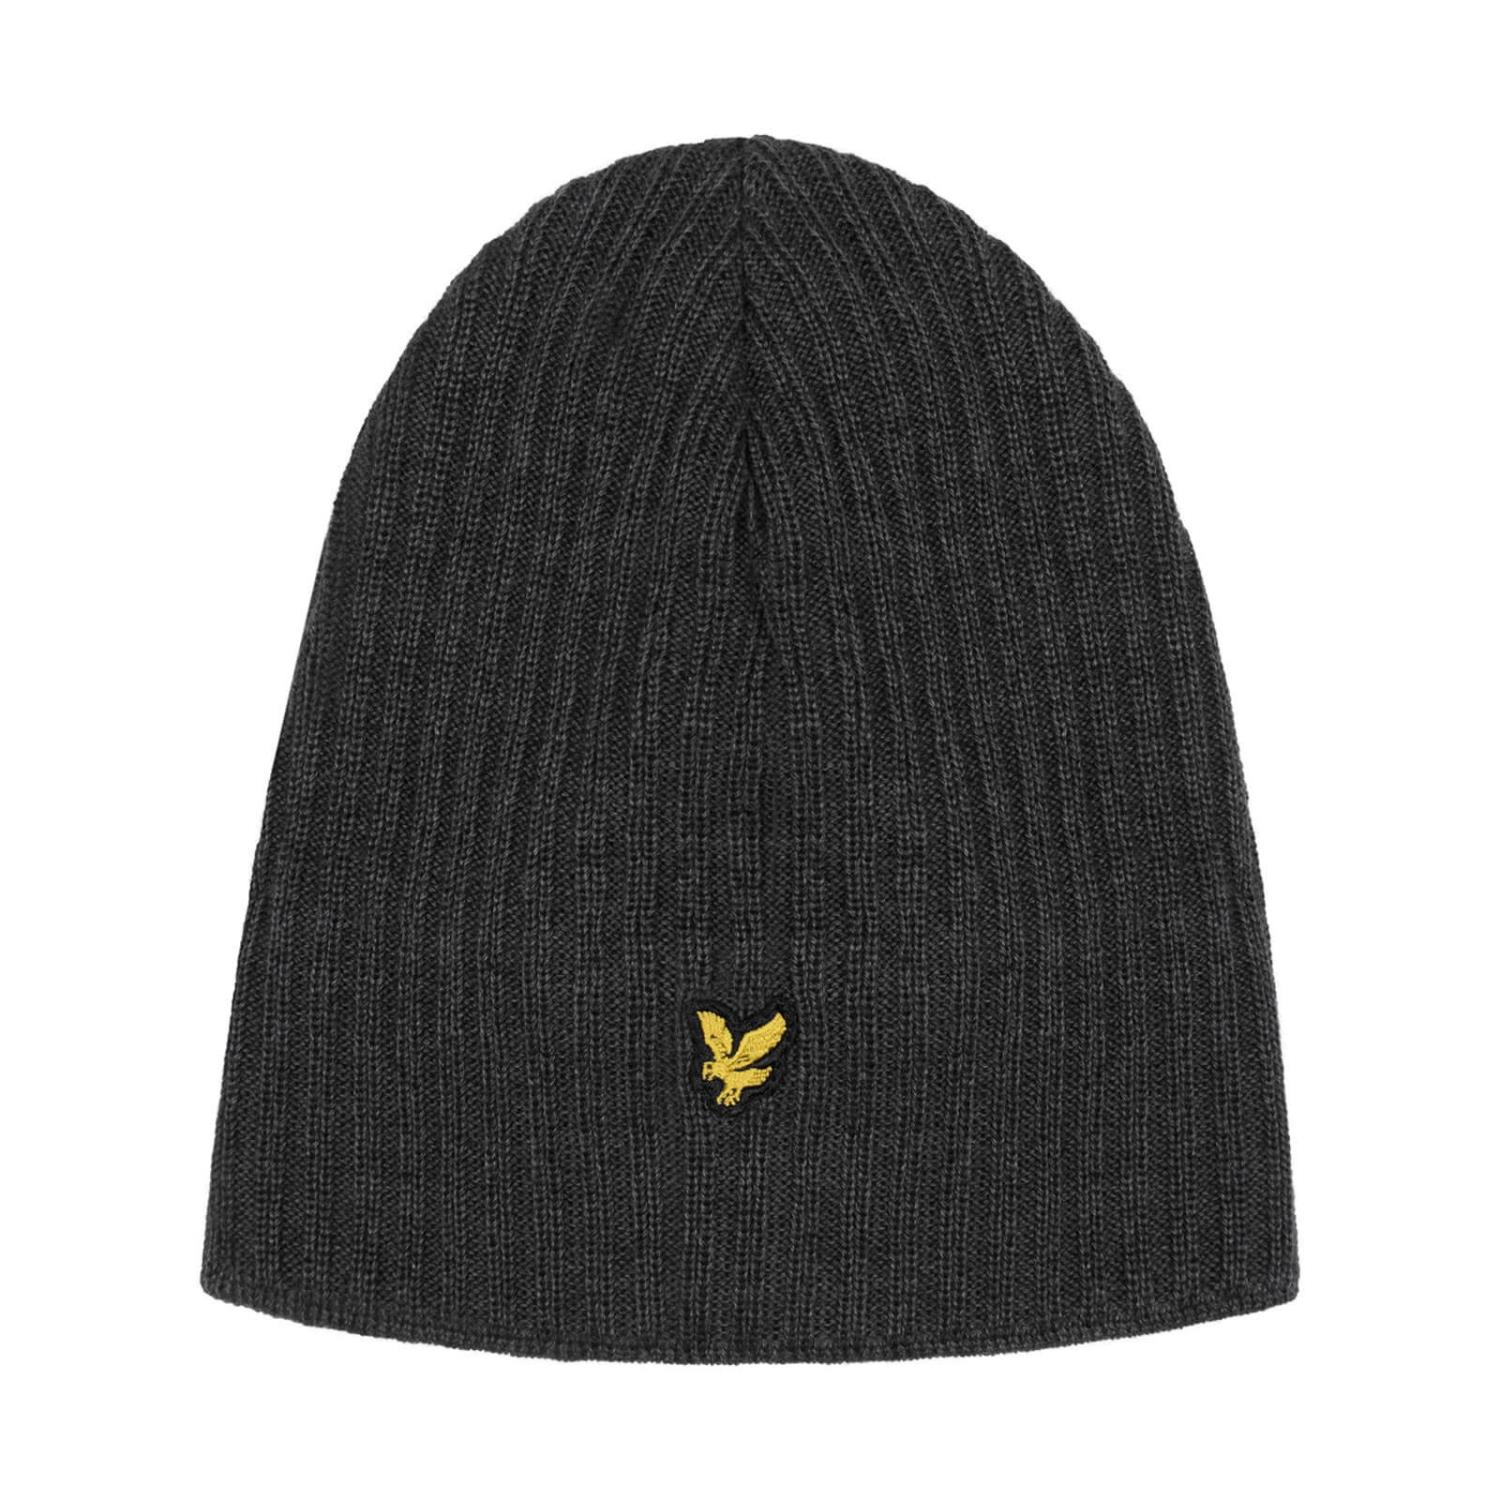 KNITTED RIBBED BEANIE GREY - LYLE & SCOTT